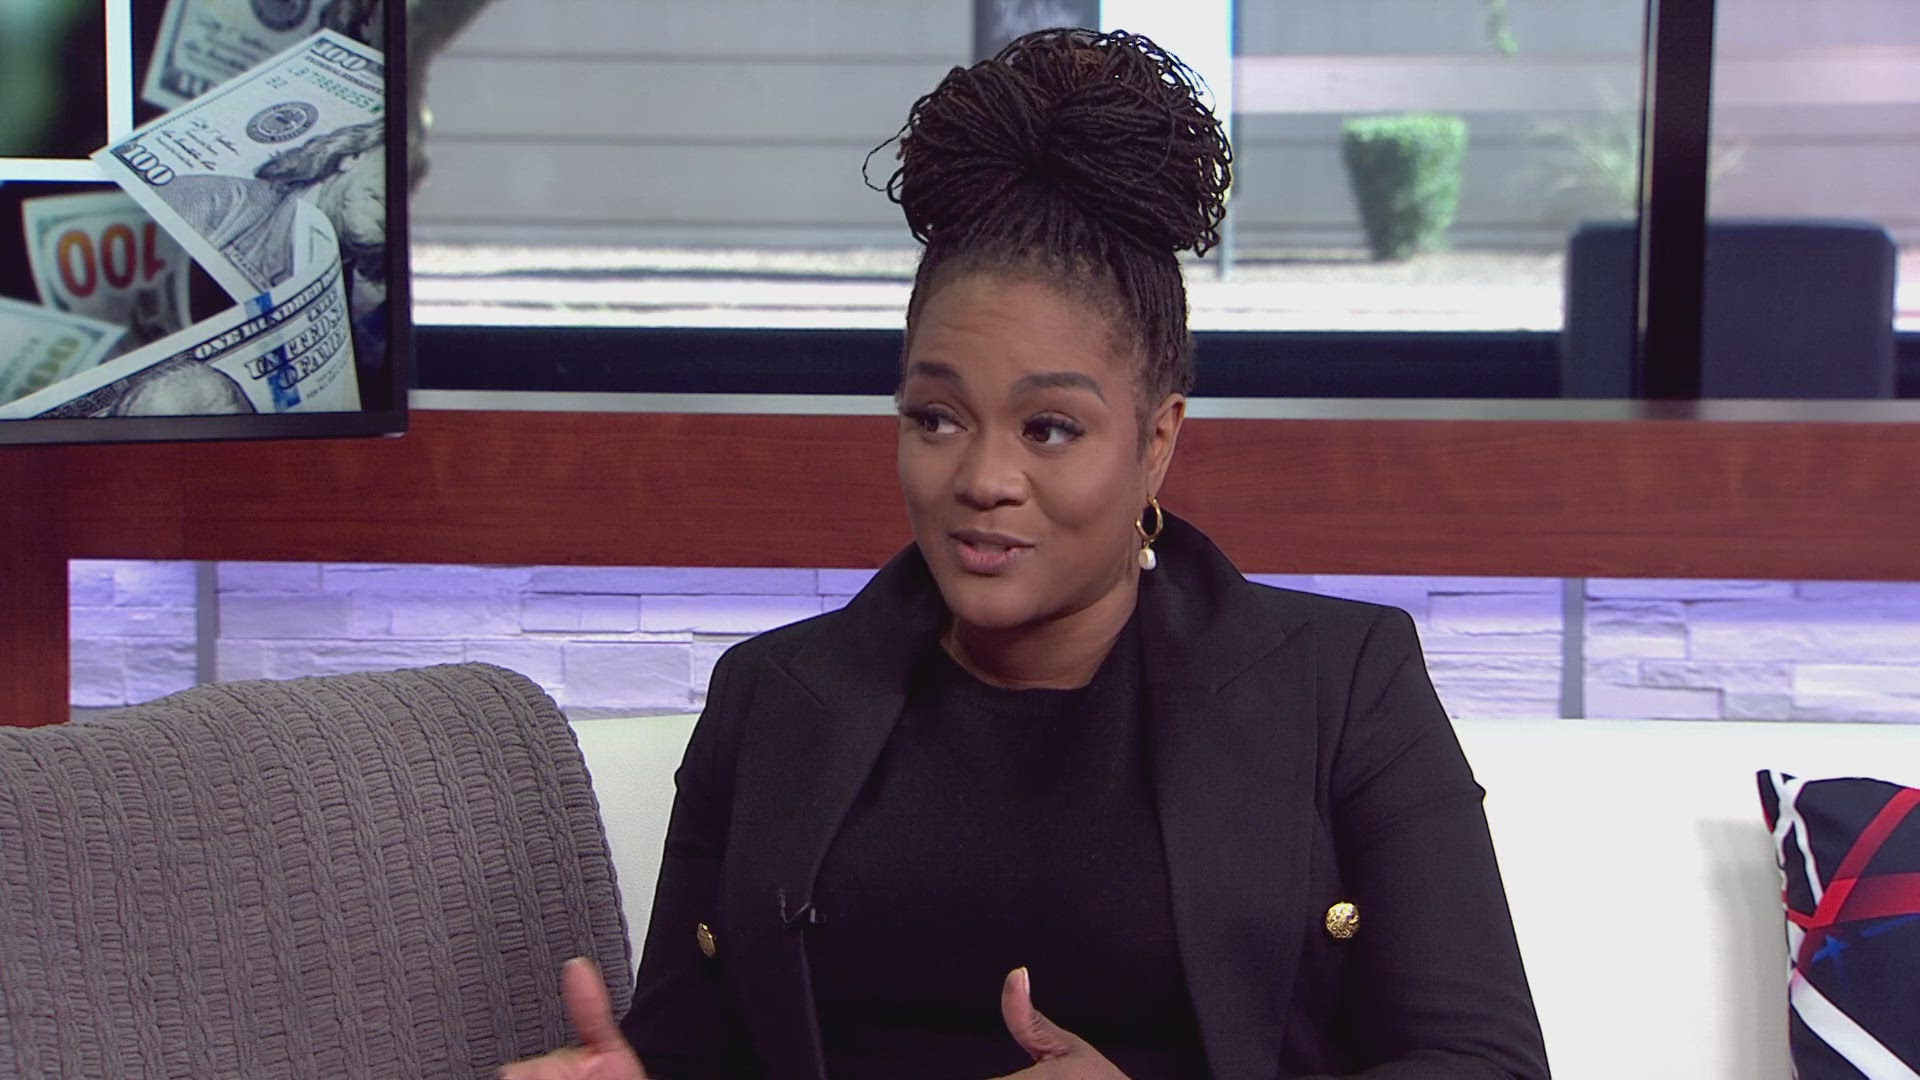 We asked financial expert Angelica Prescod about all things FAFSA, loans, and Pell grants.